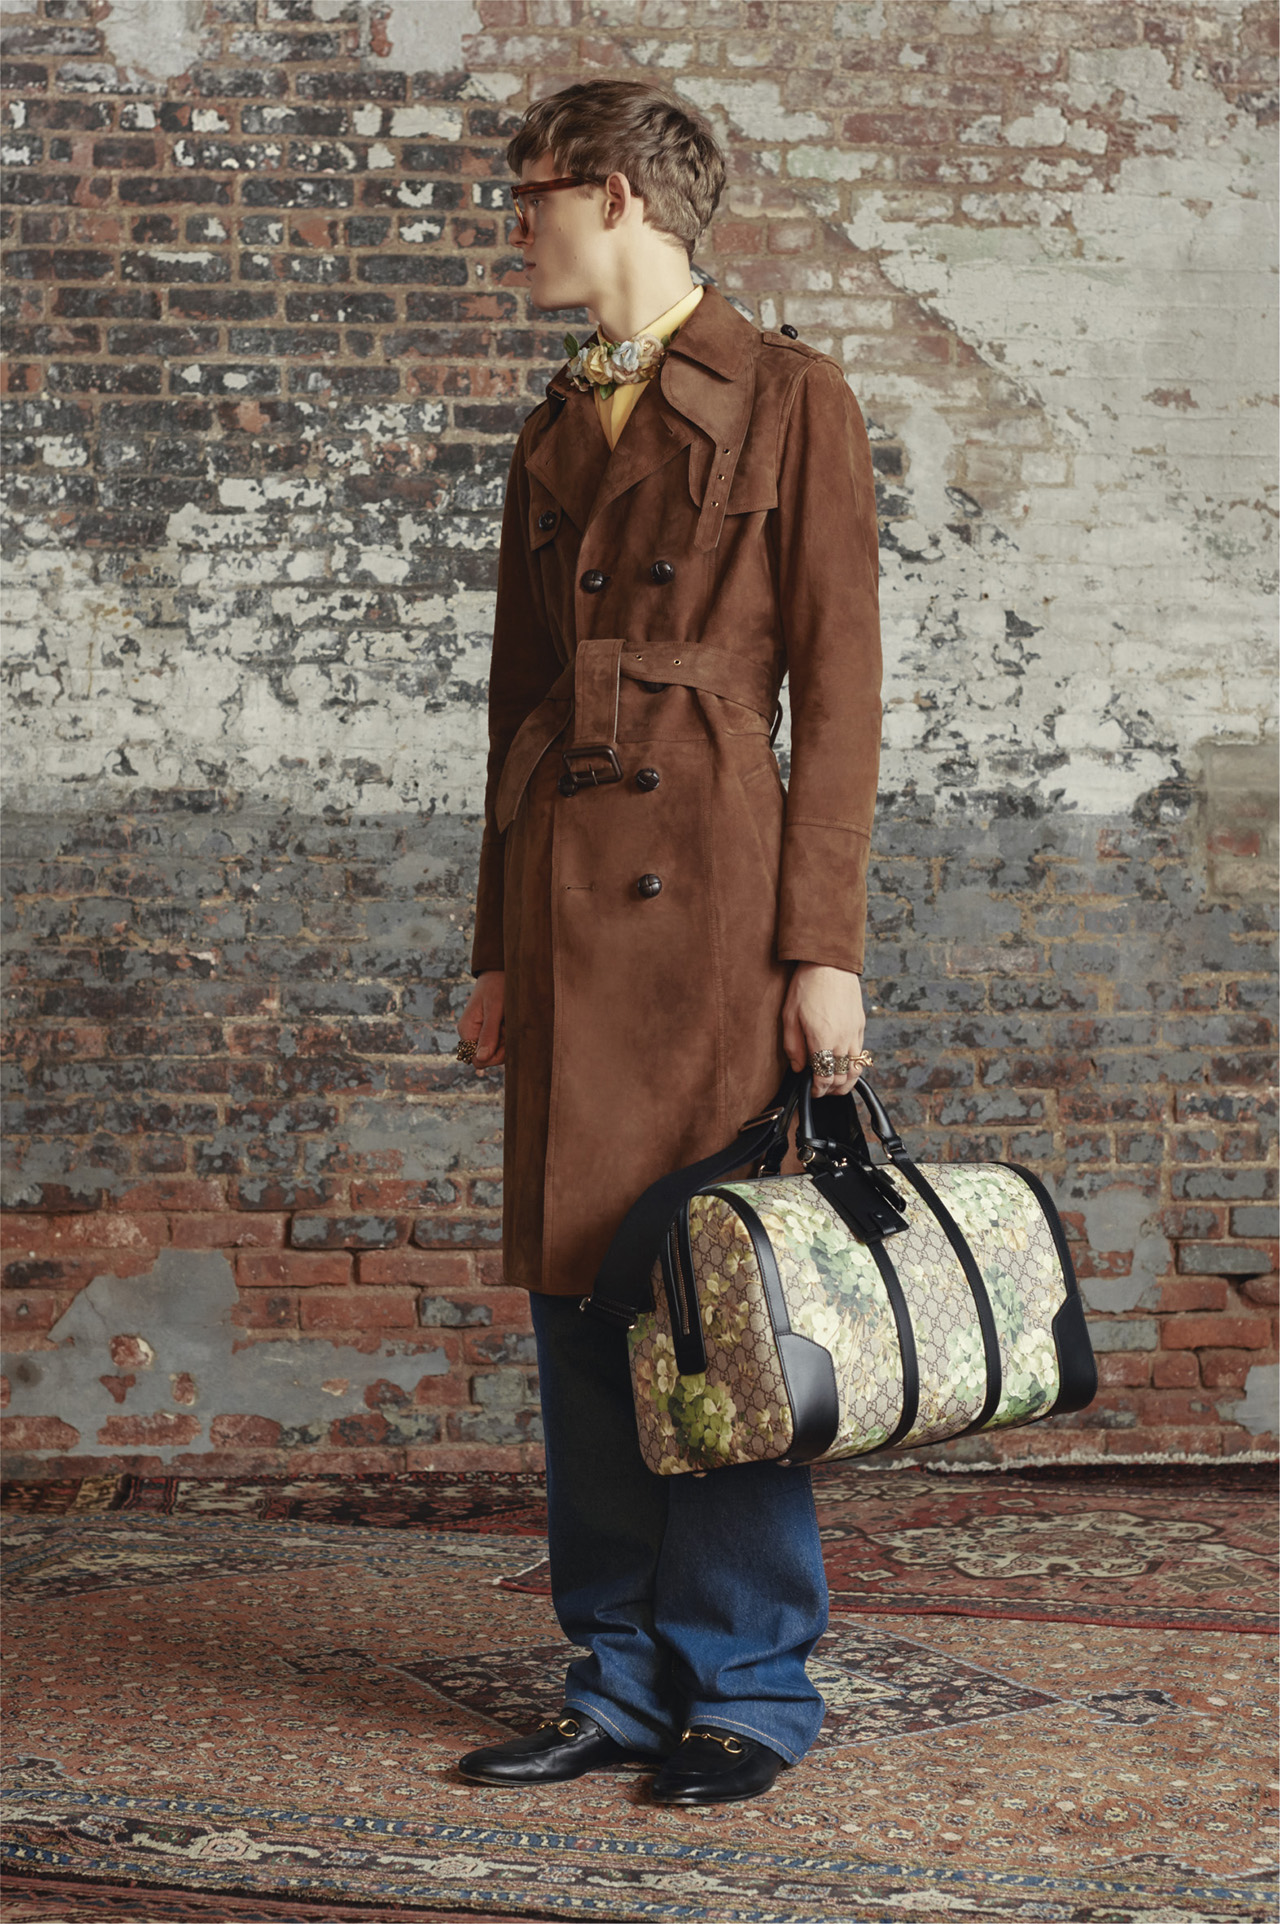 gucci-cruise-2016-collection-9